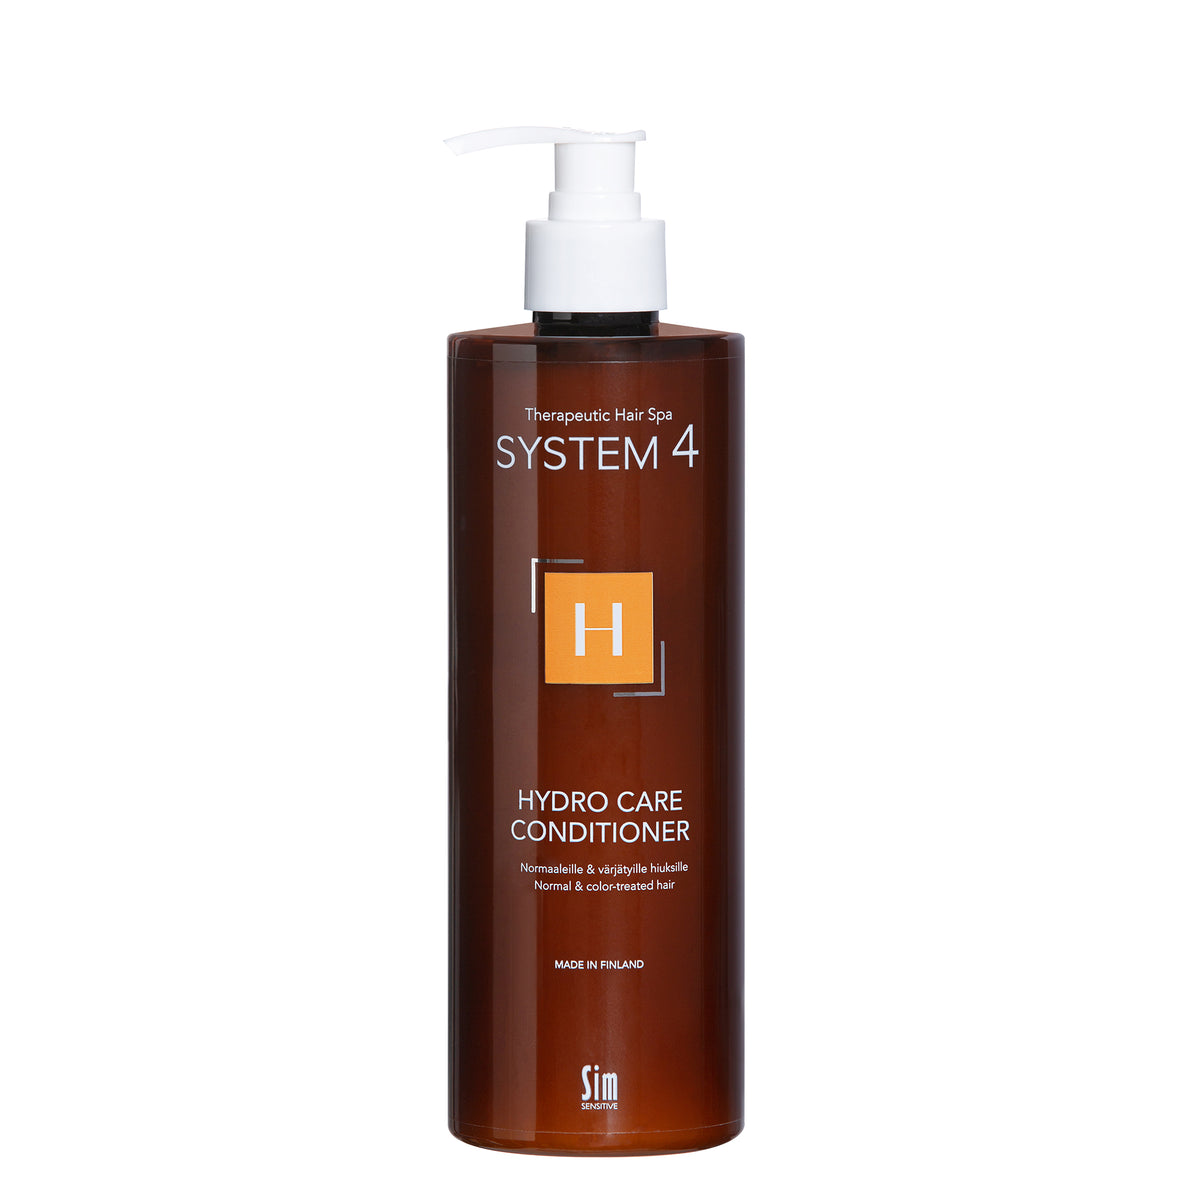 System 4 H Hydro Care Conditioner - Hoitoaine 500 ml